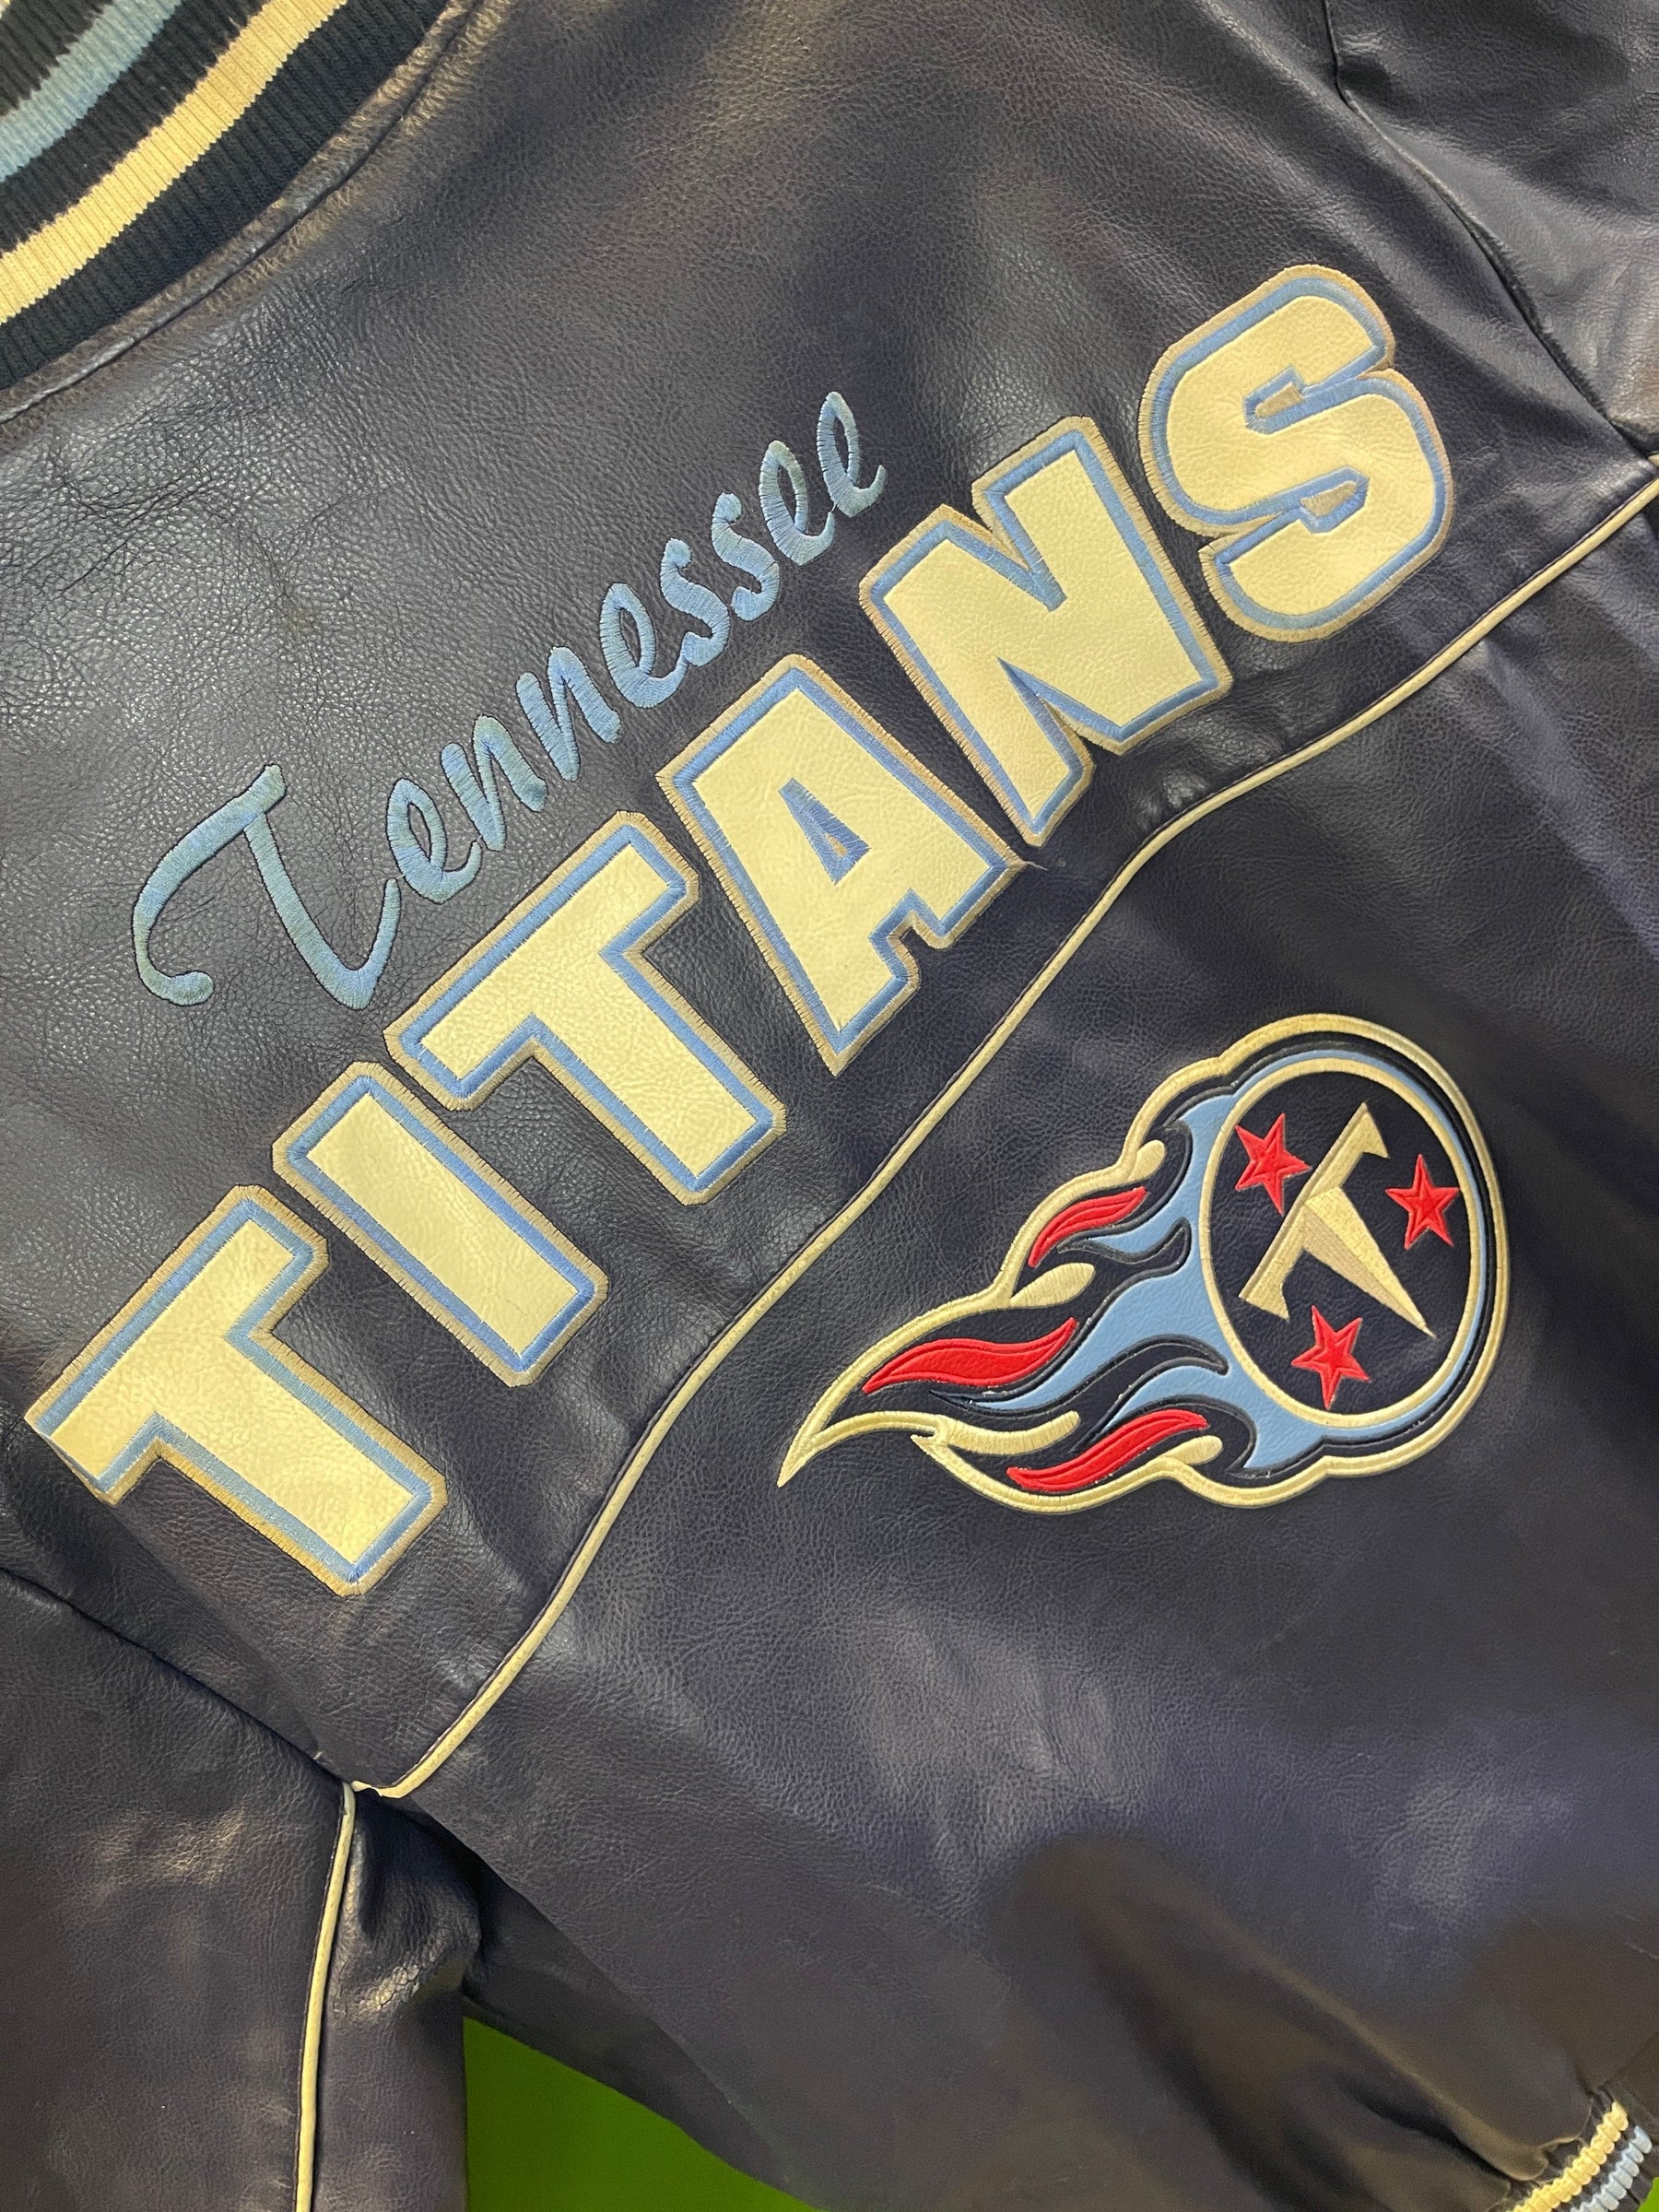 NFL Tennessee Titans GIII Vintage Faux-Leather Bomber Jacket Men's X-Large